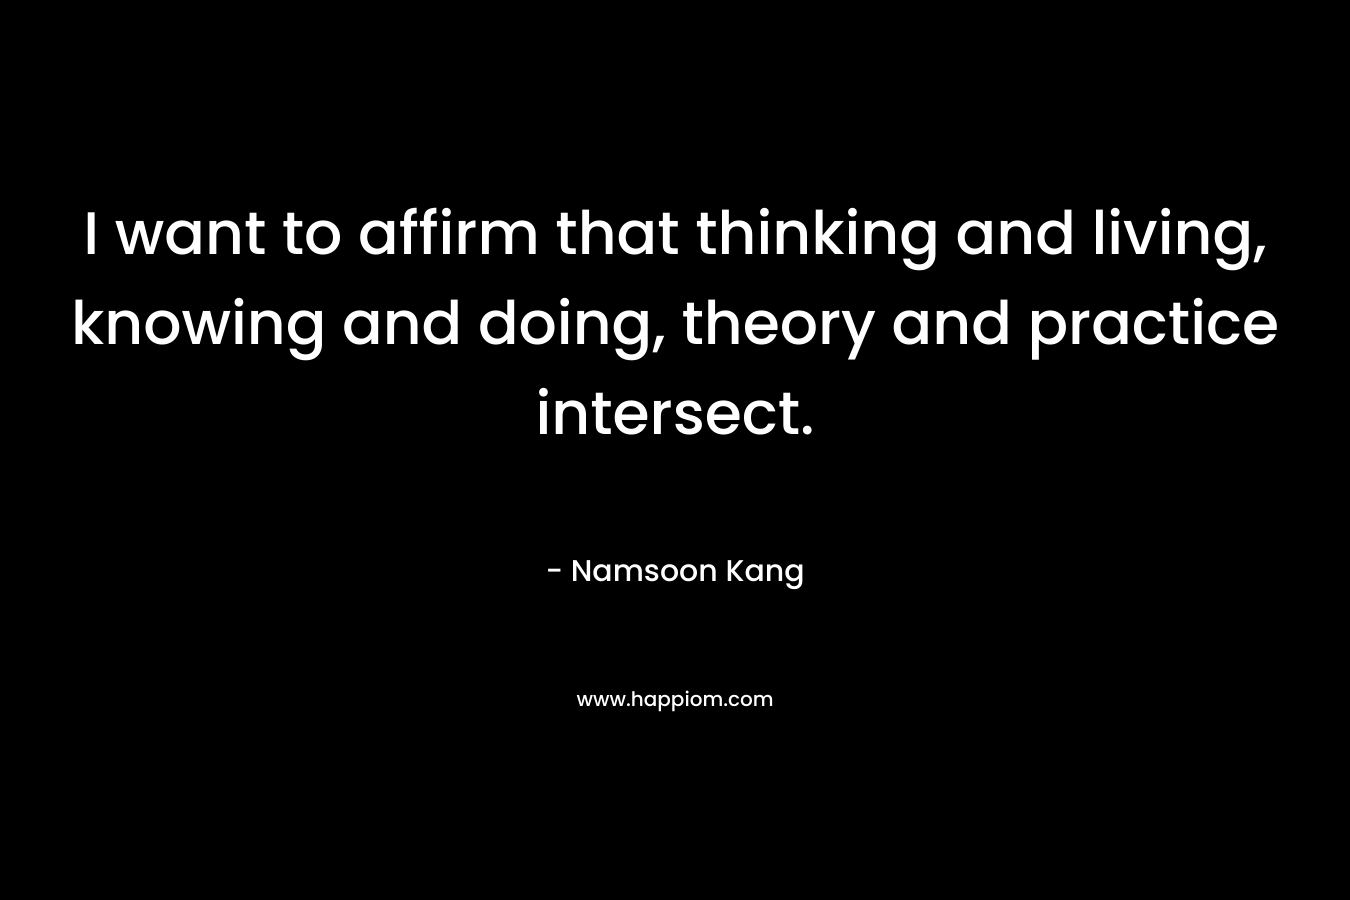 I want to affirm that thinking and living, knowing and doing, theory and practice intersect.